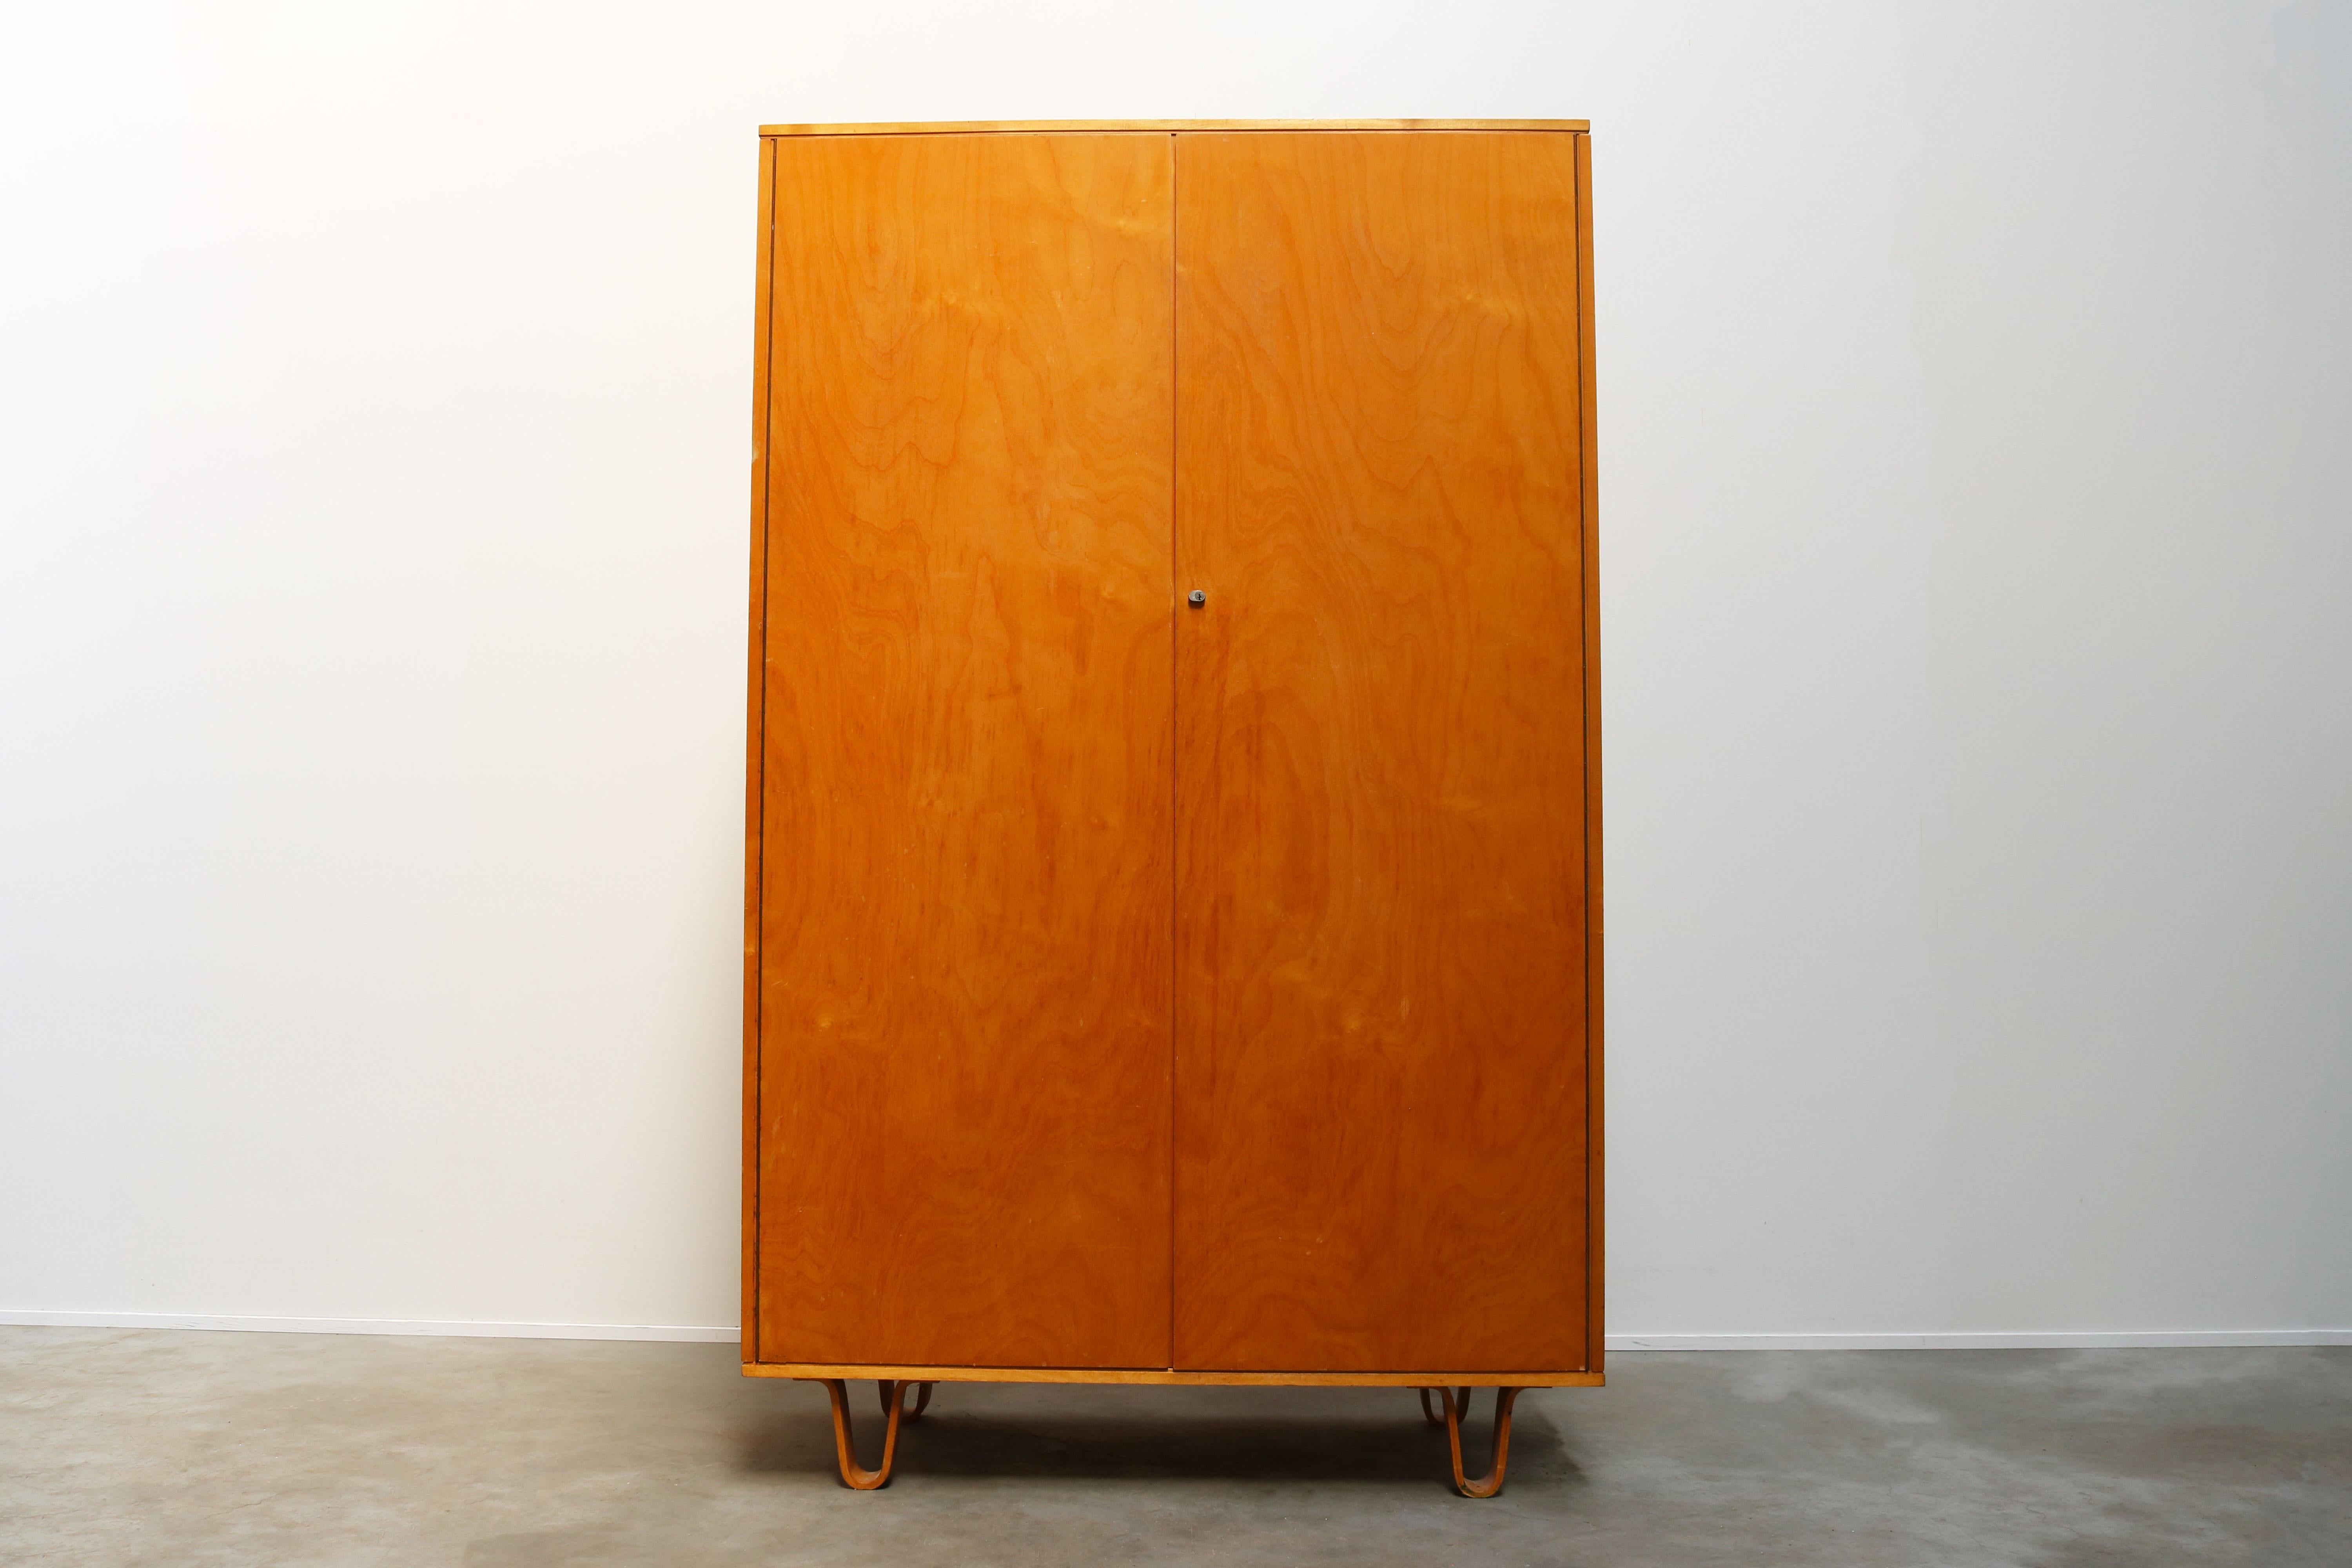 This KB03 cabinet is from the Birch series and was designed by Cees Braakman and produced by UMS Pastoe in the 1950s. It has distinctive laced feet. The cabinet has a wardrobe on the right and 4 shelves, small shelf and mirror on the left side.